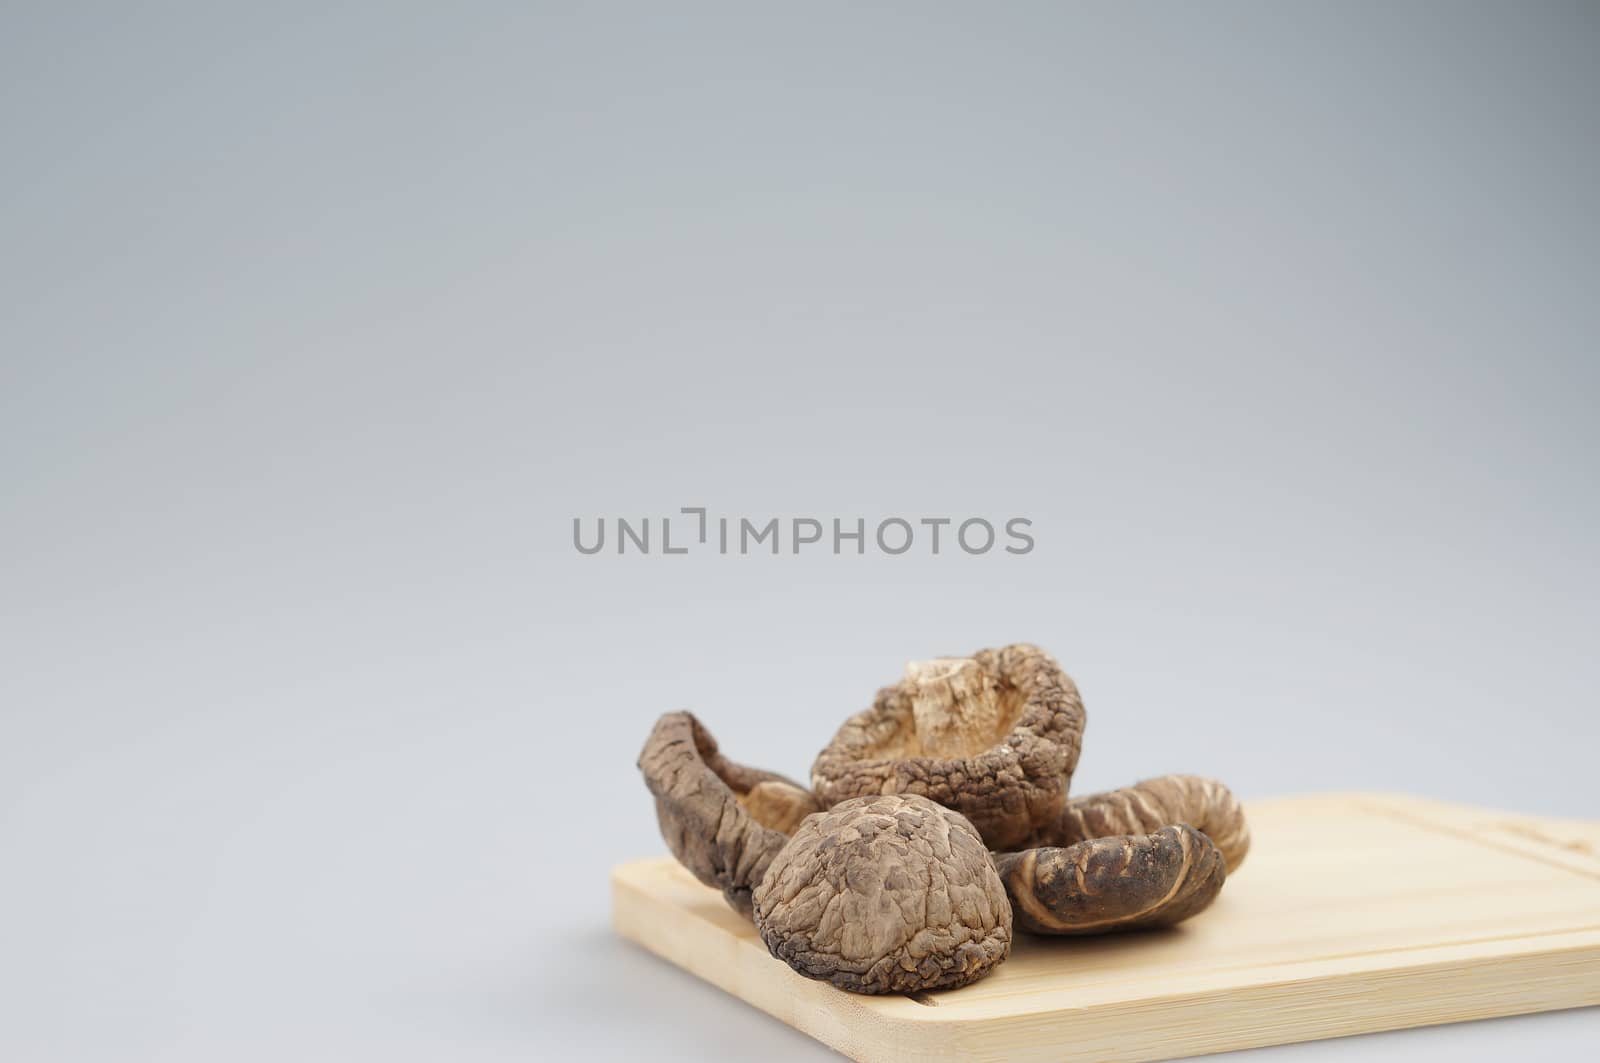 Dry Shitake mushroom or lentnus edodes place on wooden chopping board with white background and copy space.